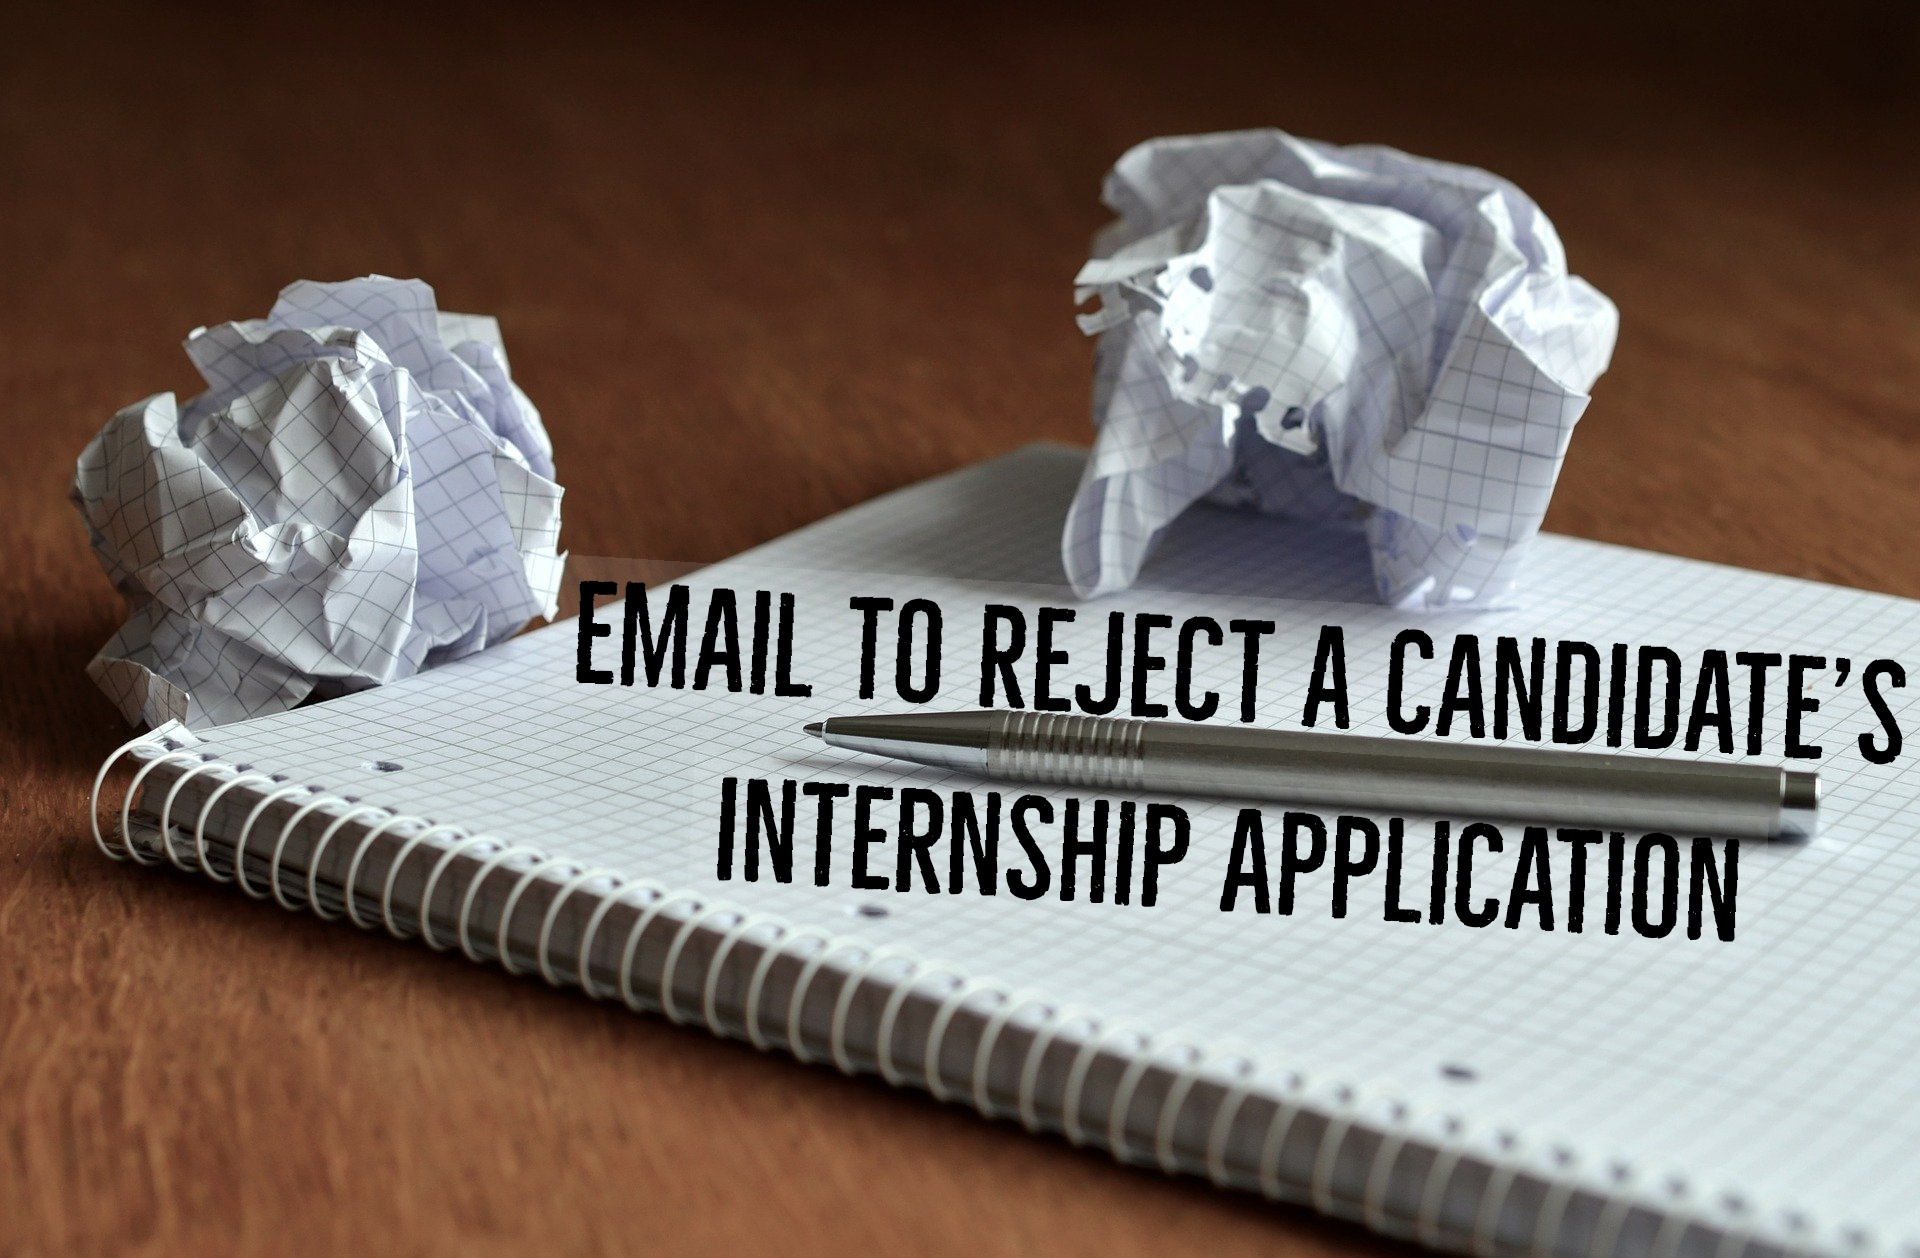 Email to reject a candidate’s internship application